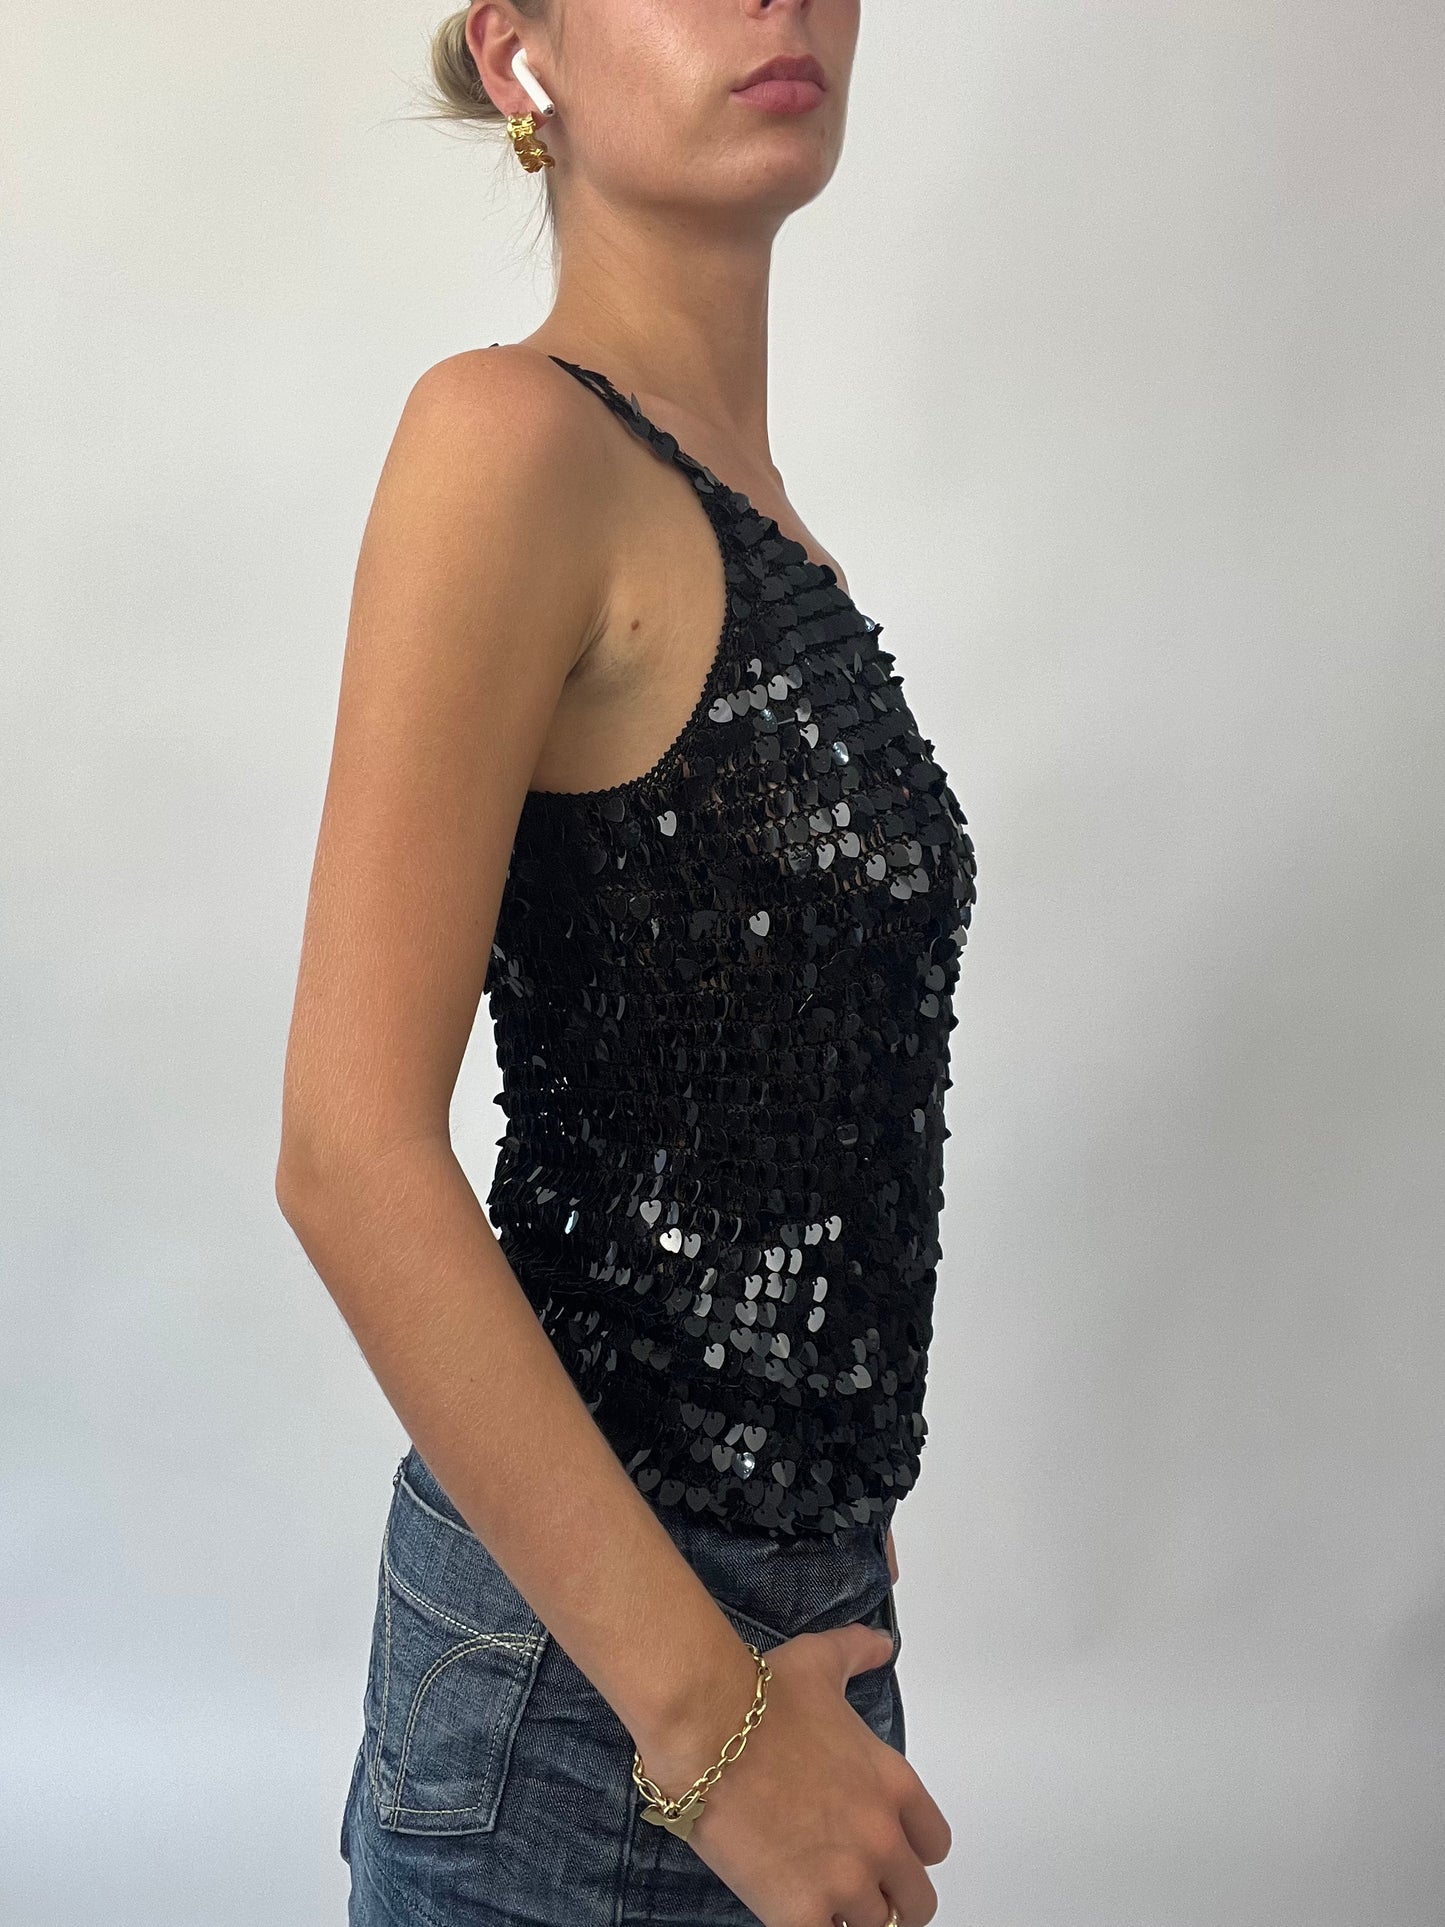 BRAT GIRL SUMMER DROP | small black cami with heart-shaped sequins